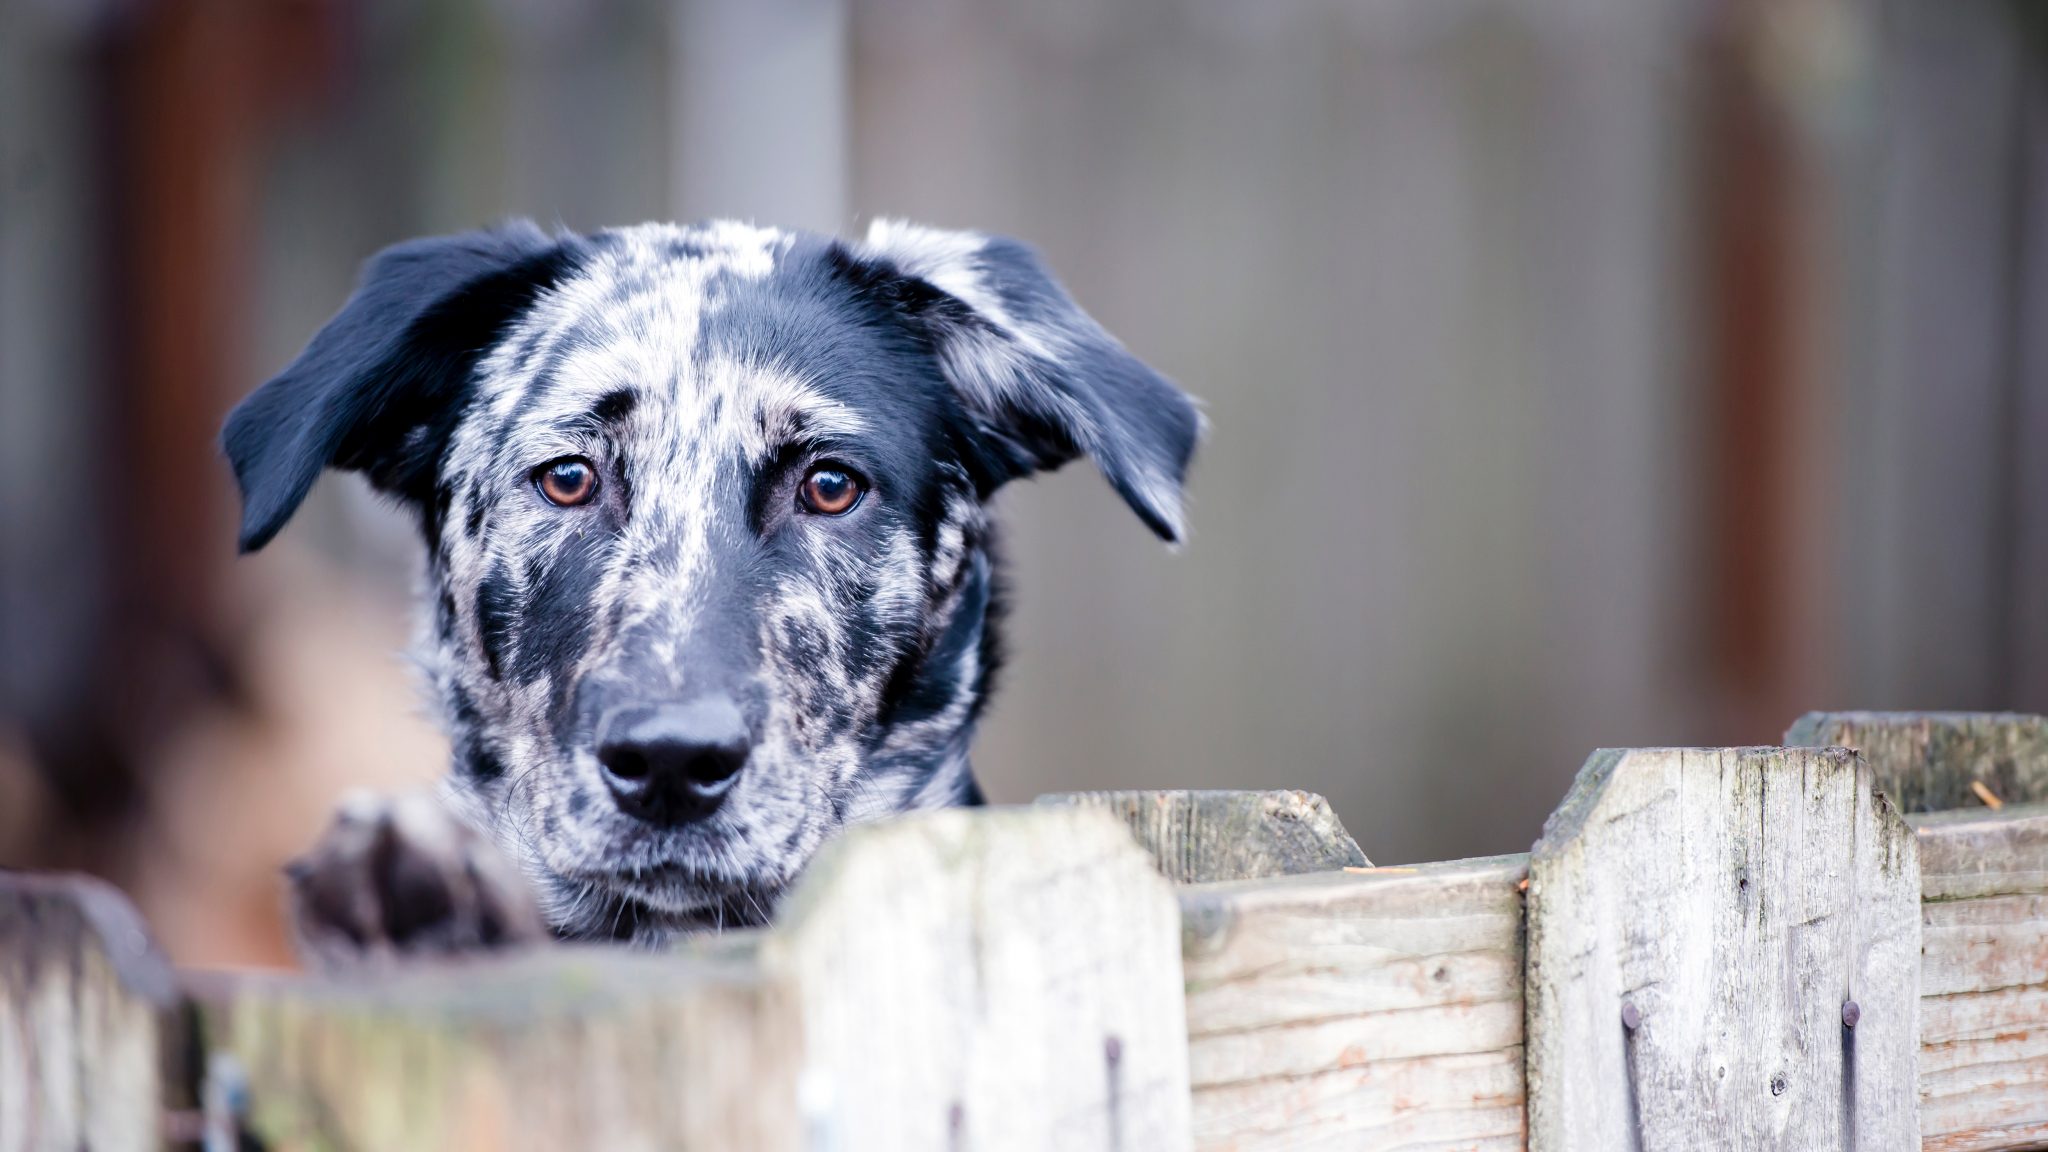 what are the dog laws in new zealand